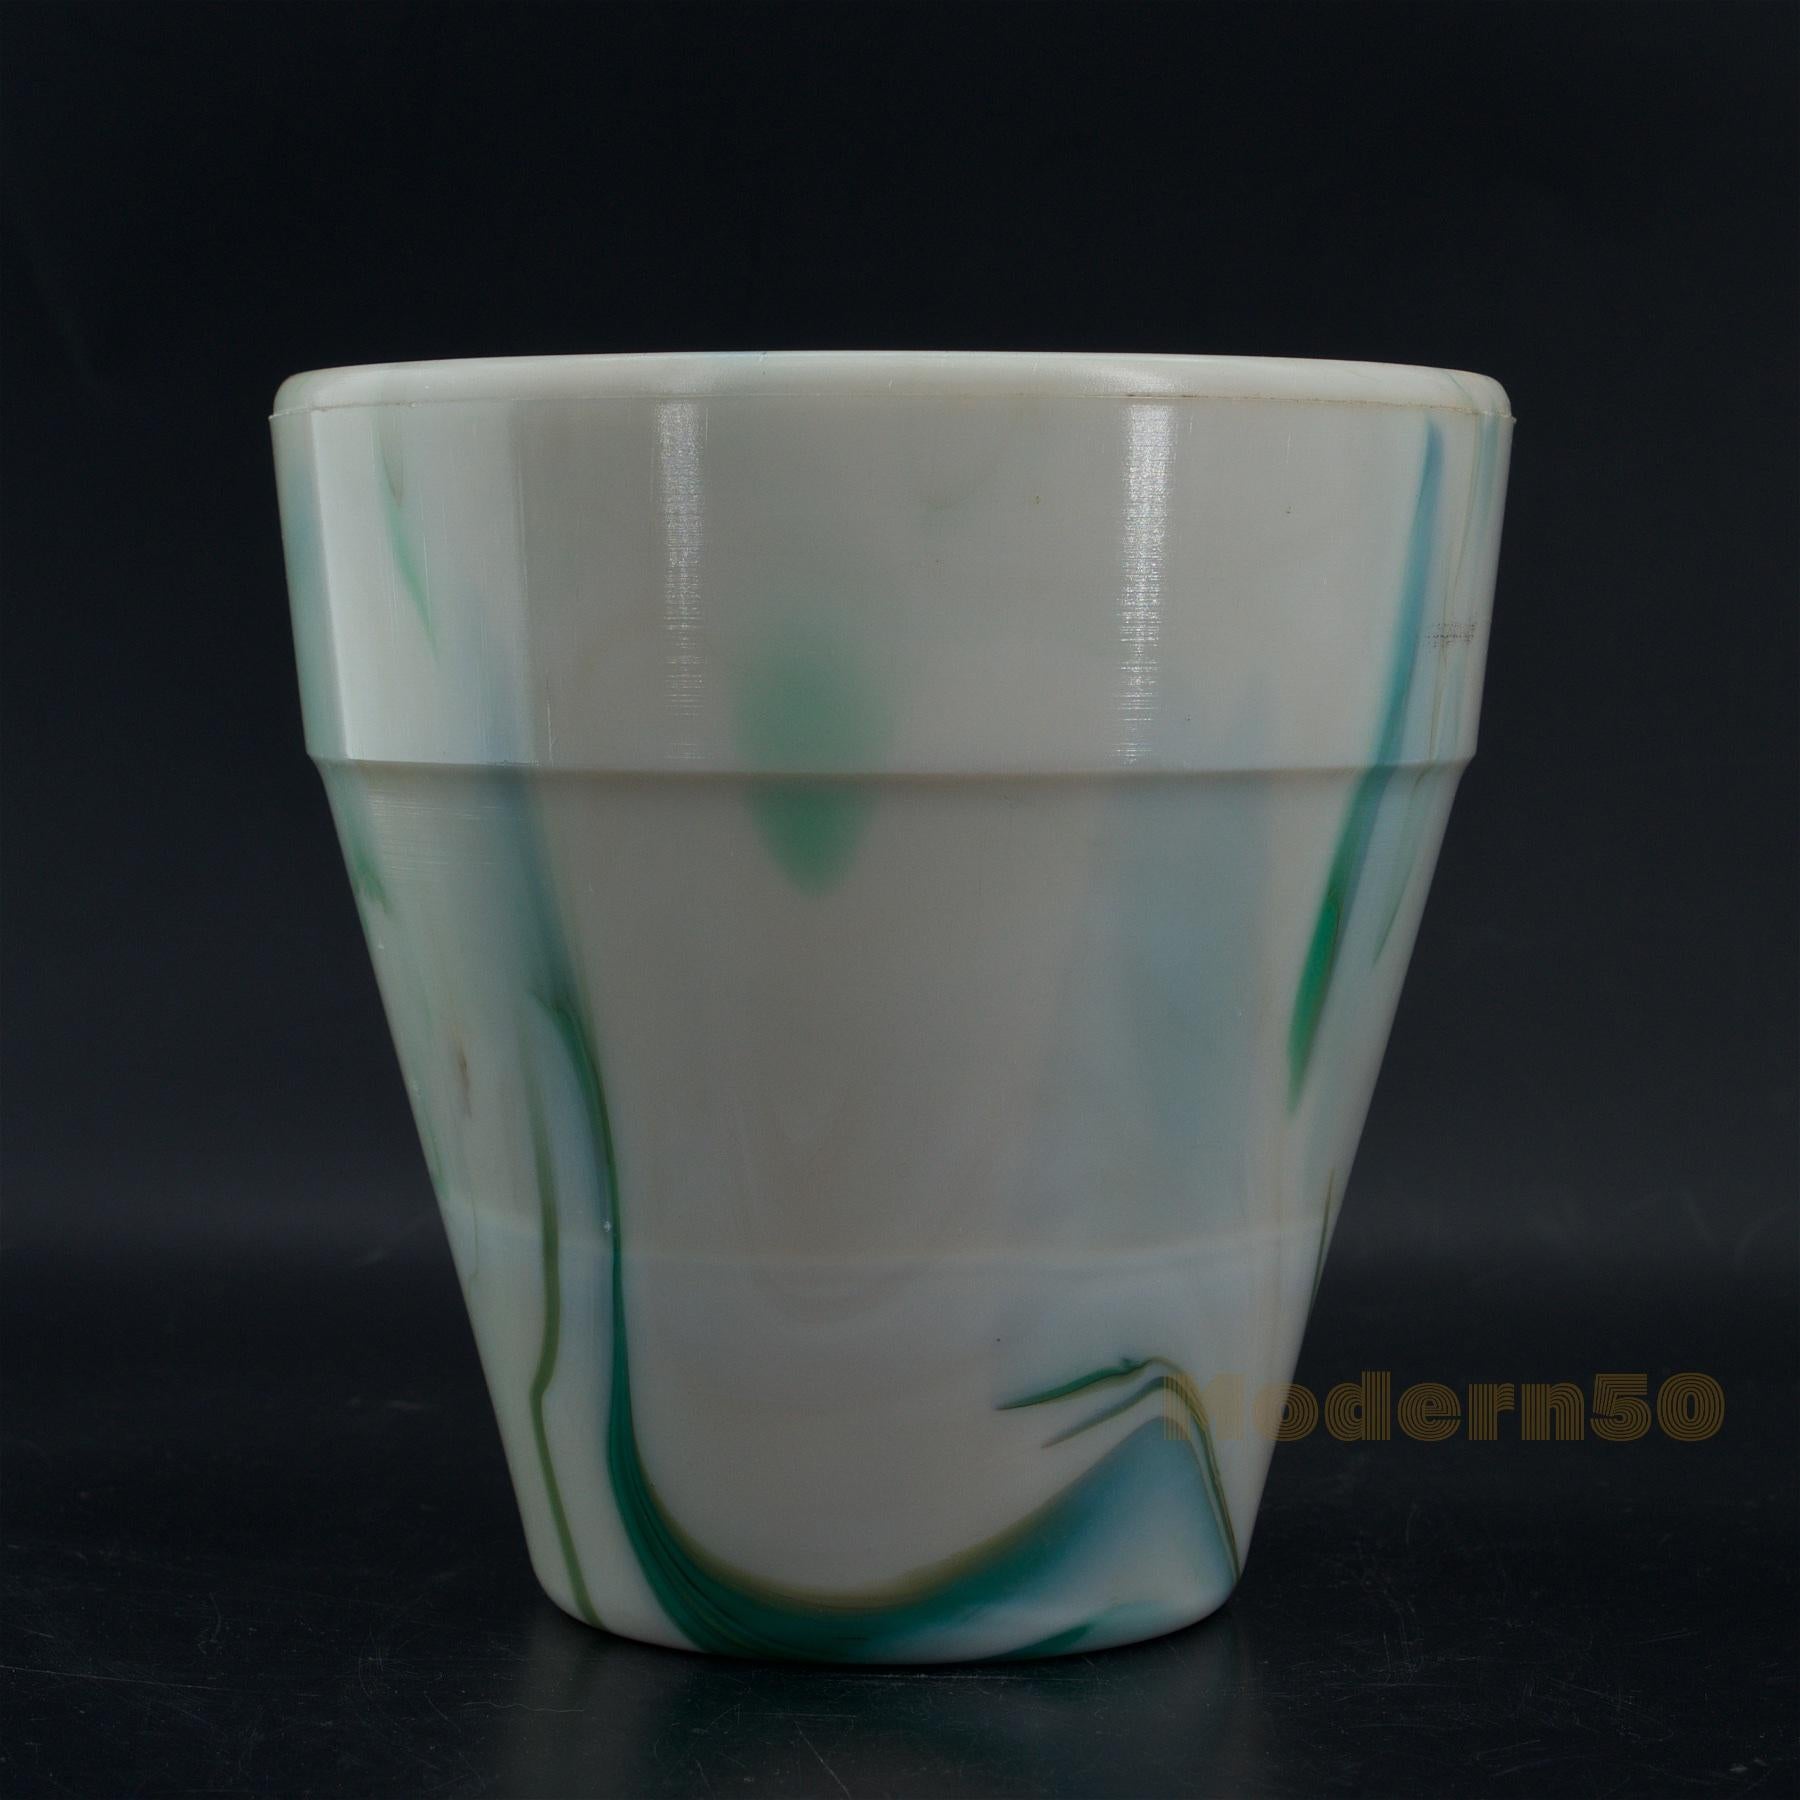 Westite Glass Company #302 bow tie flower pot. Green and cream slag. Tapering traditional form flower pot with rim. Embossed on base: 